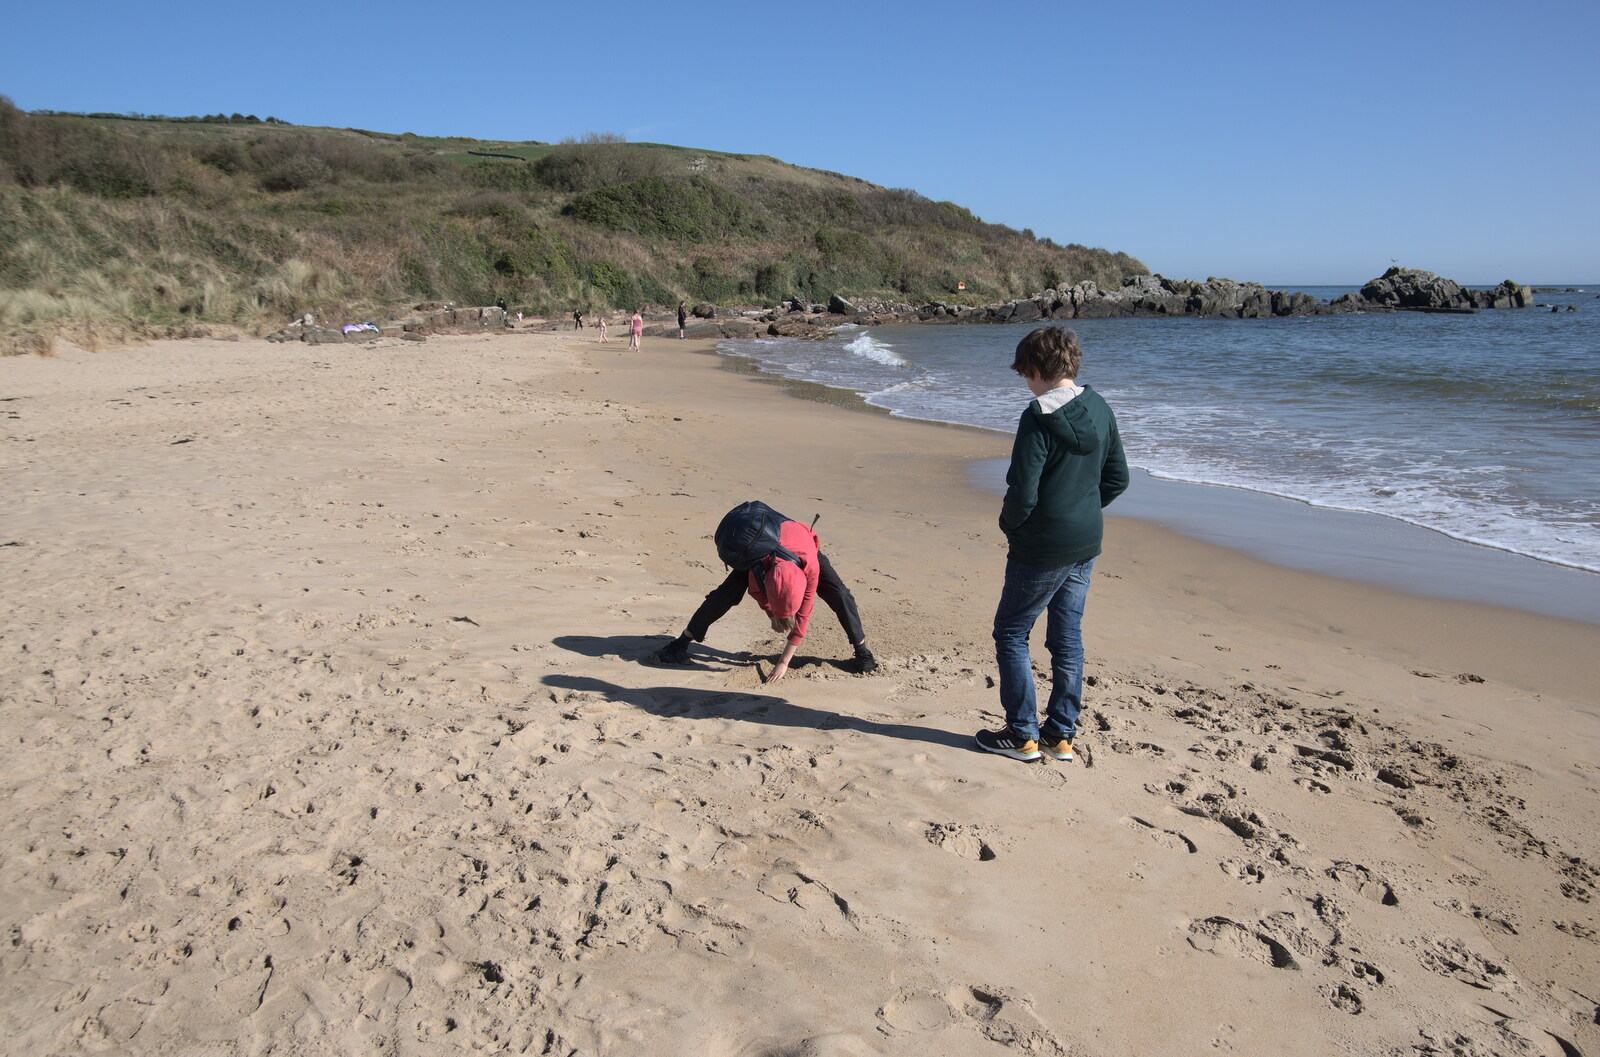 Greencastle, Doagh and Malin Head, County Donegal, Ireland - 19th April 2022: Harry and Fred on a beach at Shroove